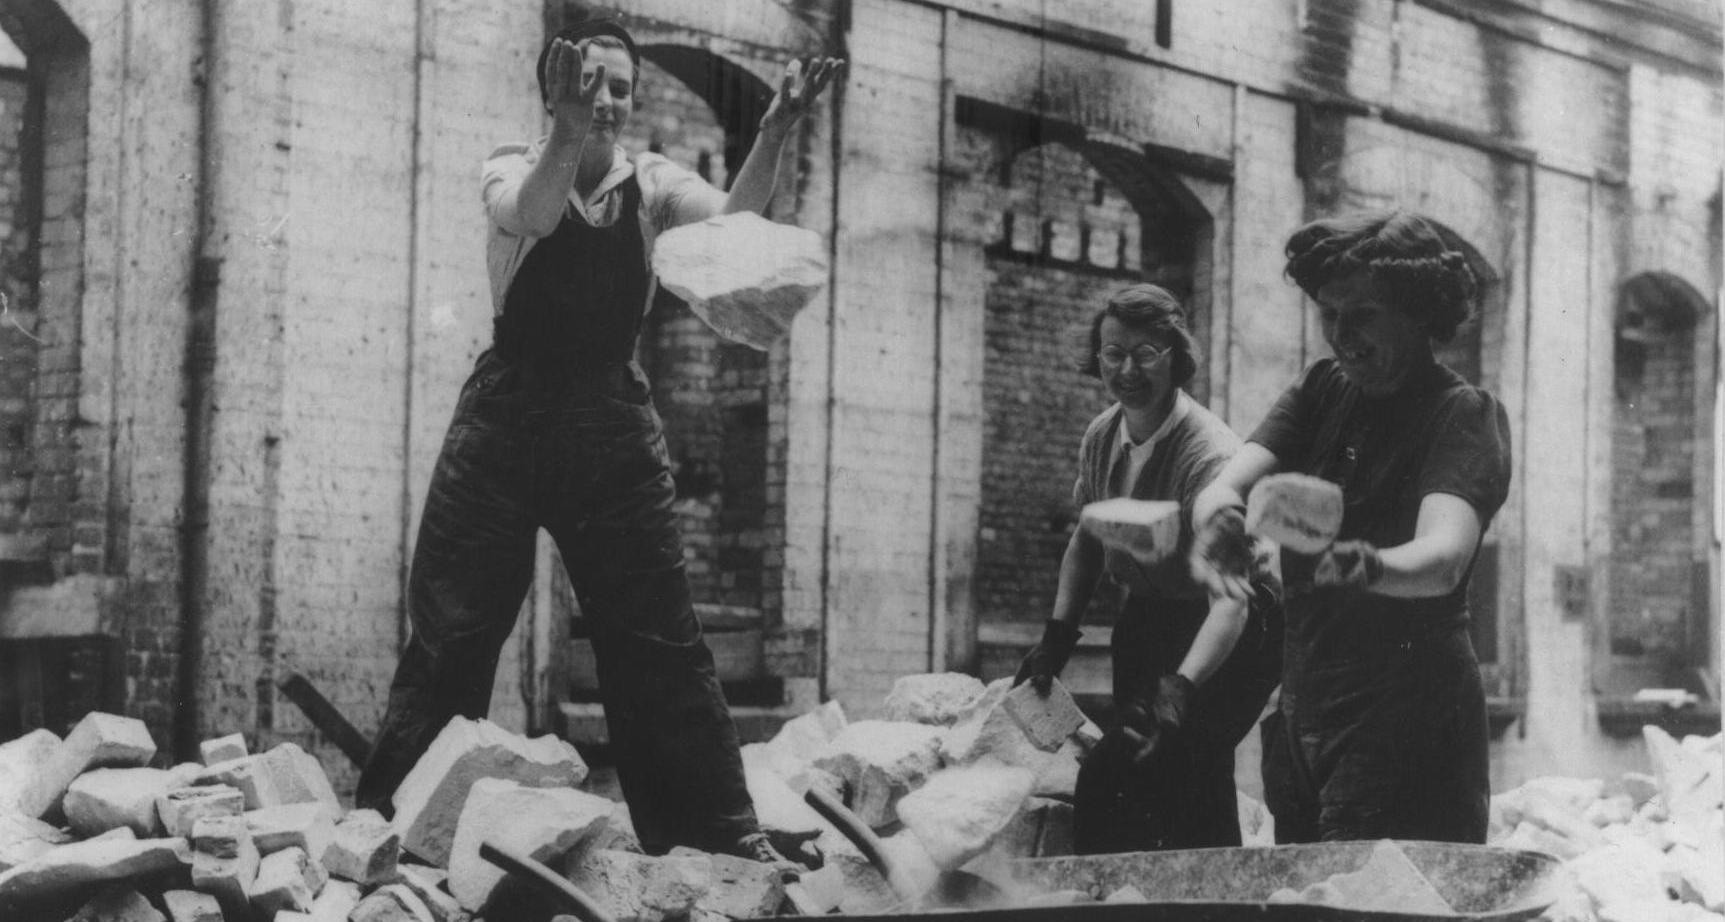 Three women wearing work clothes and gloves carry large chunks of stone around a building site.